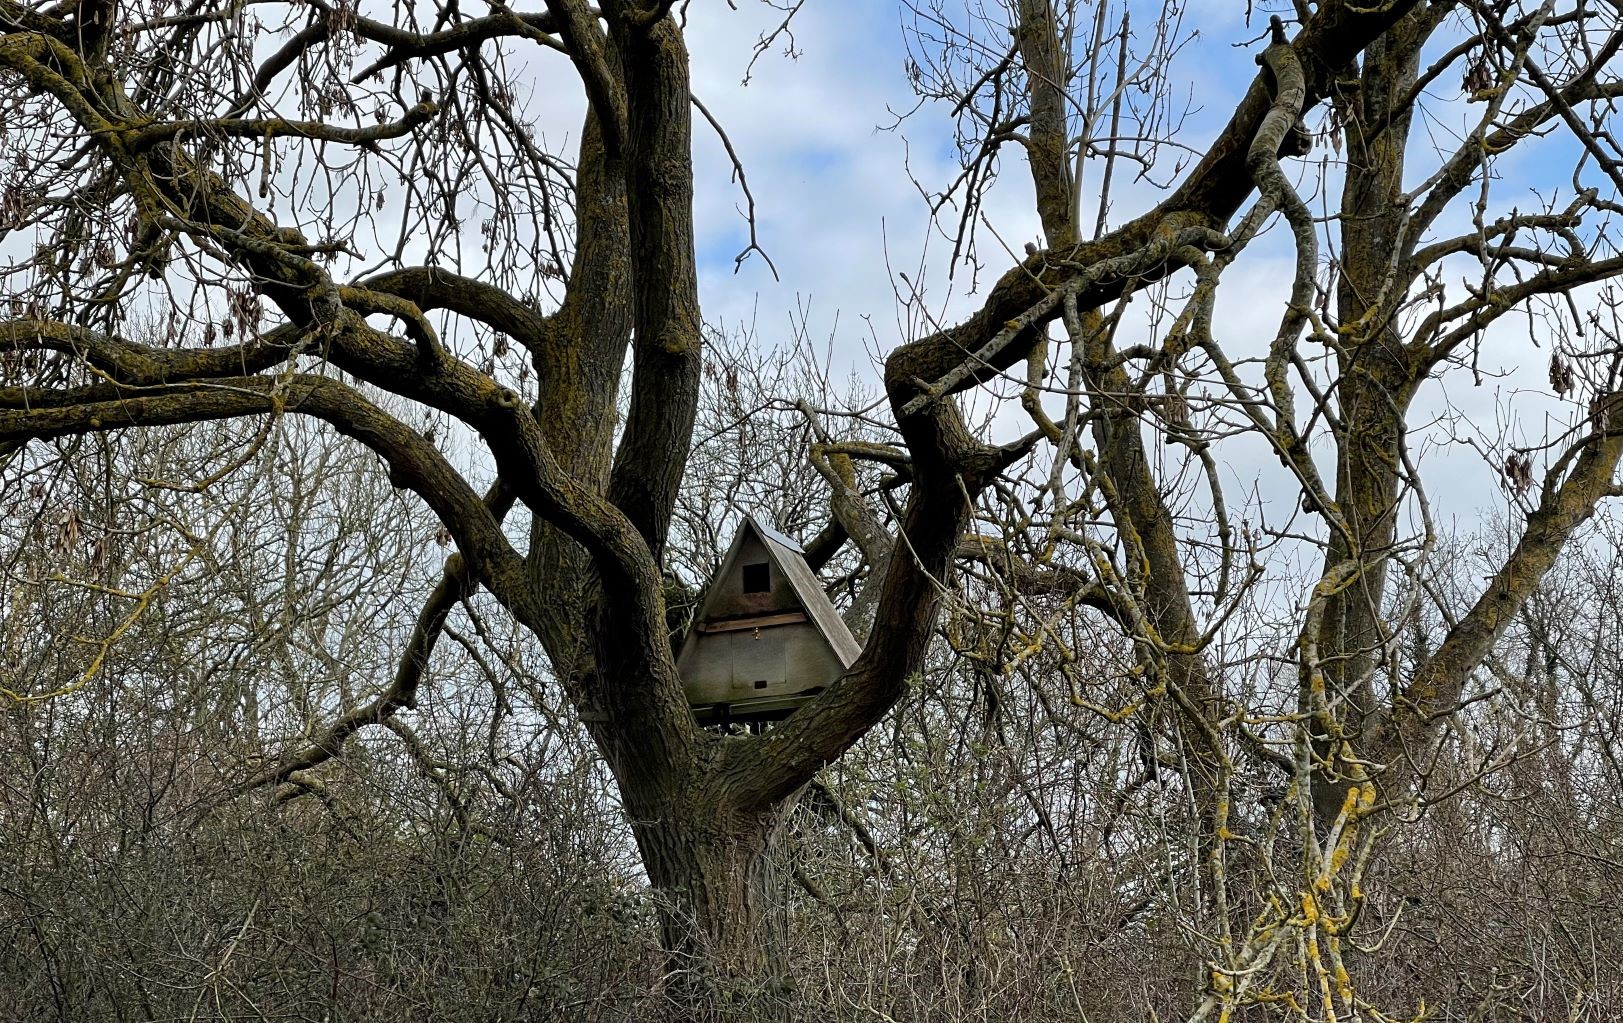 Owl box in a tree in Giddings Wood in the Forest